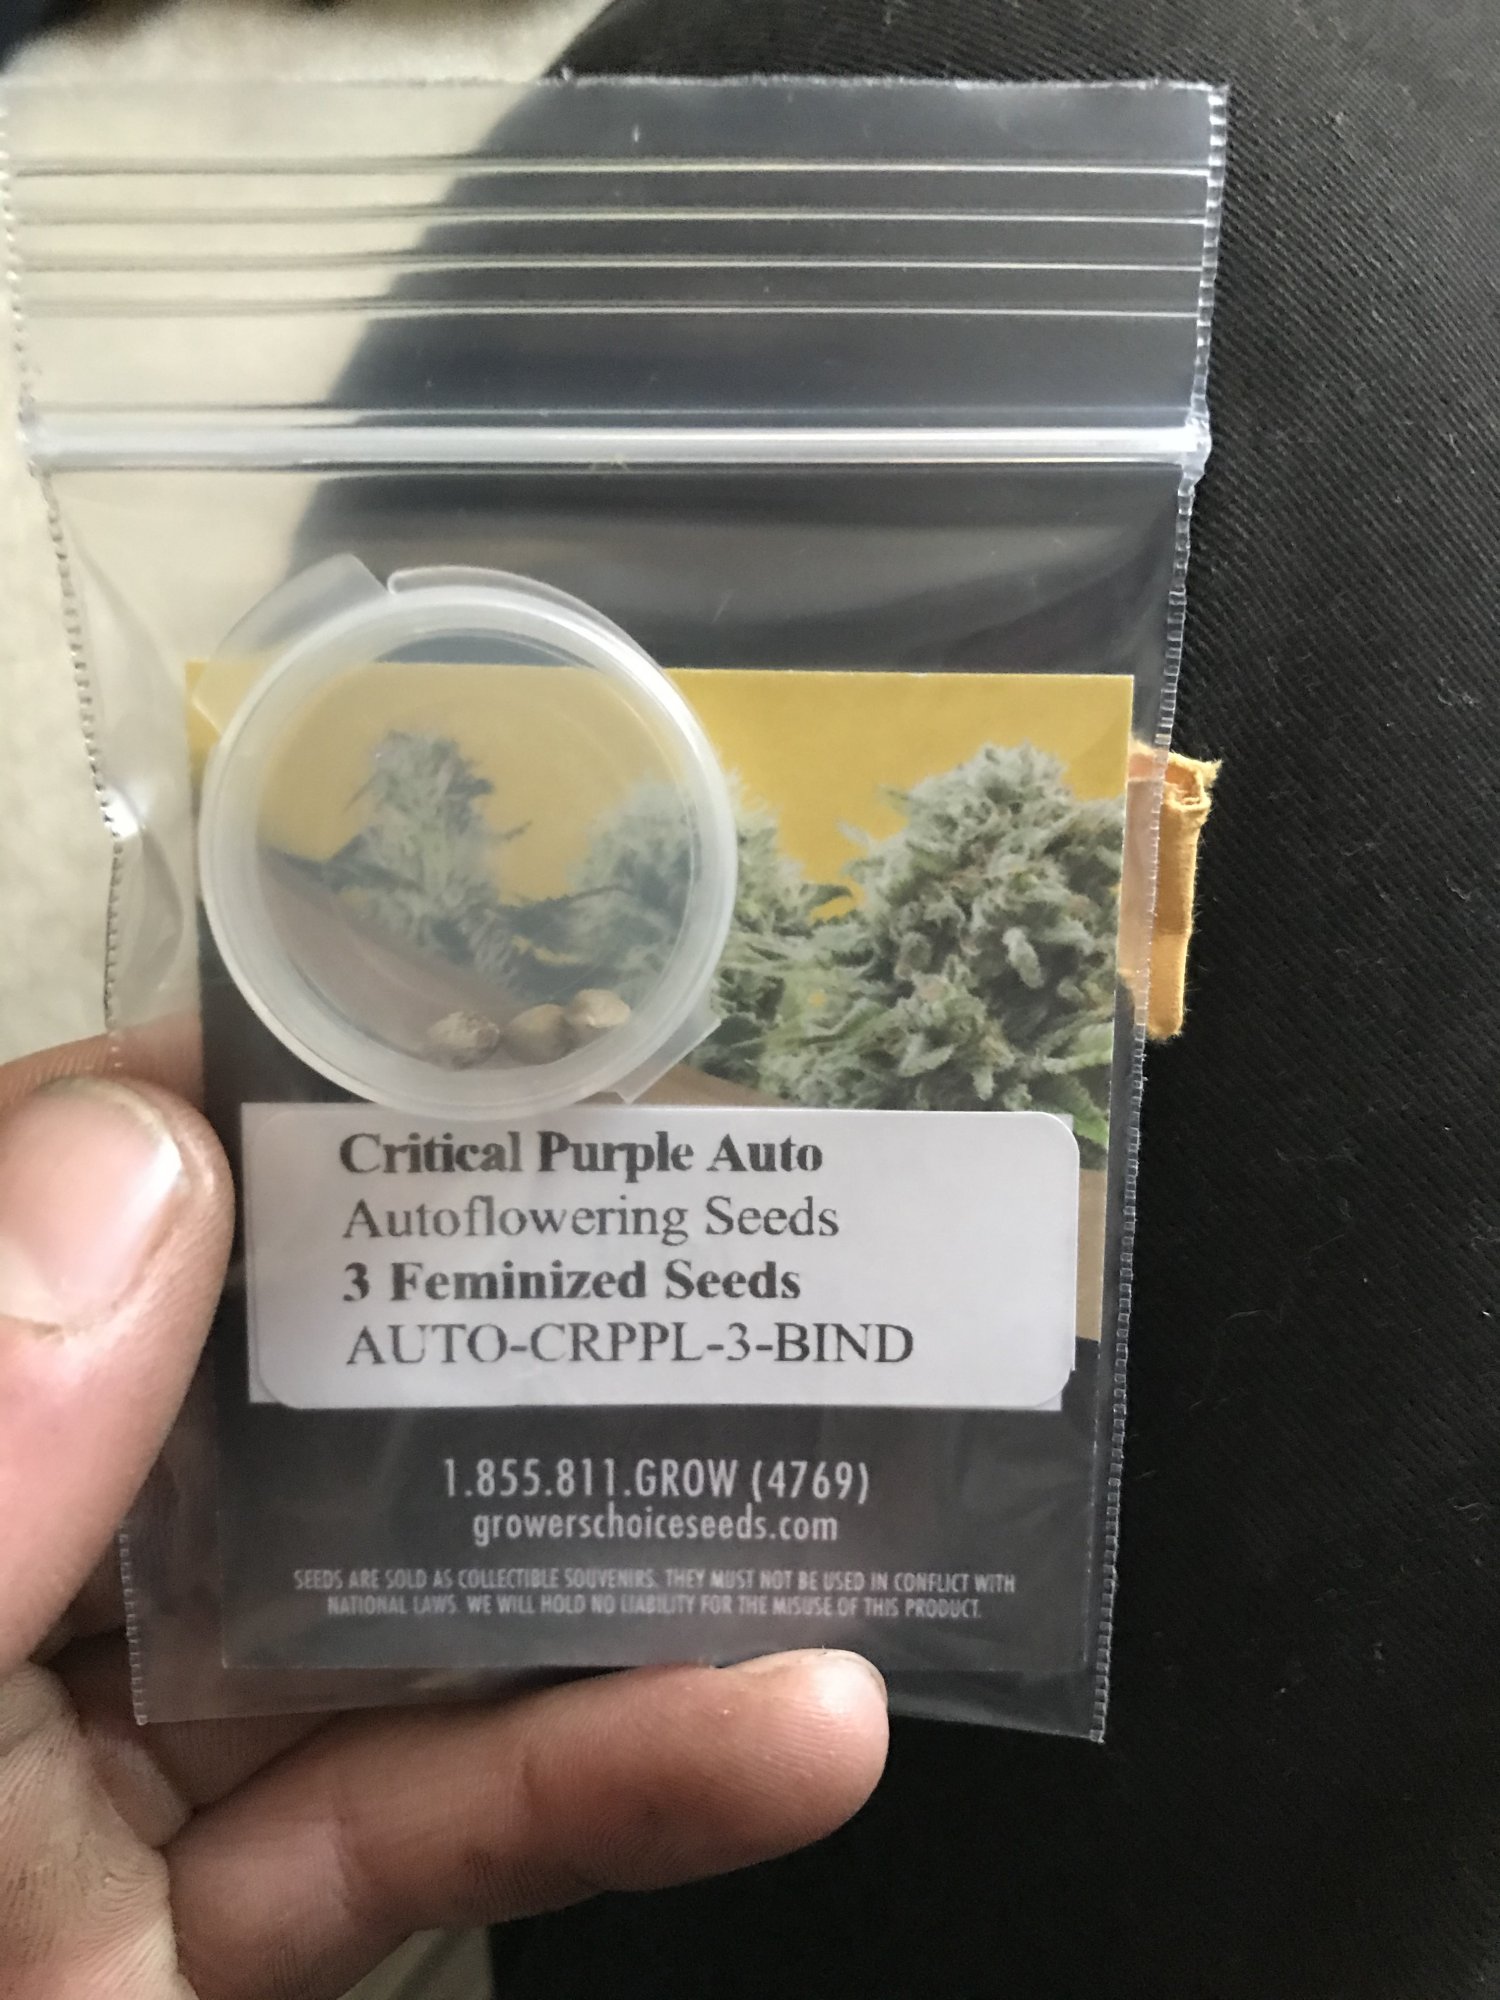 Critical purple auto tips from growers choice seeds